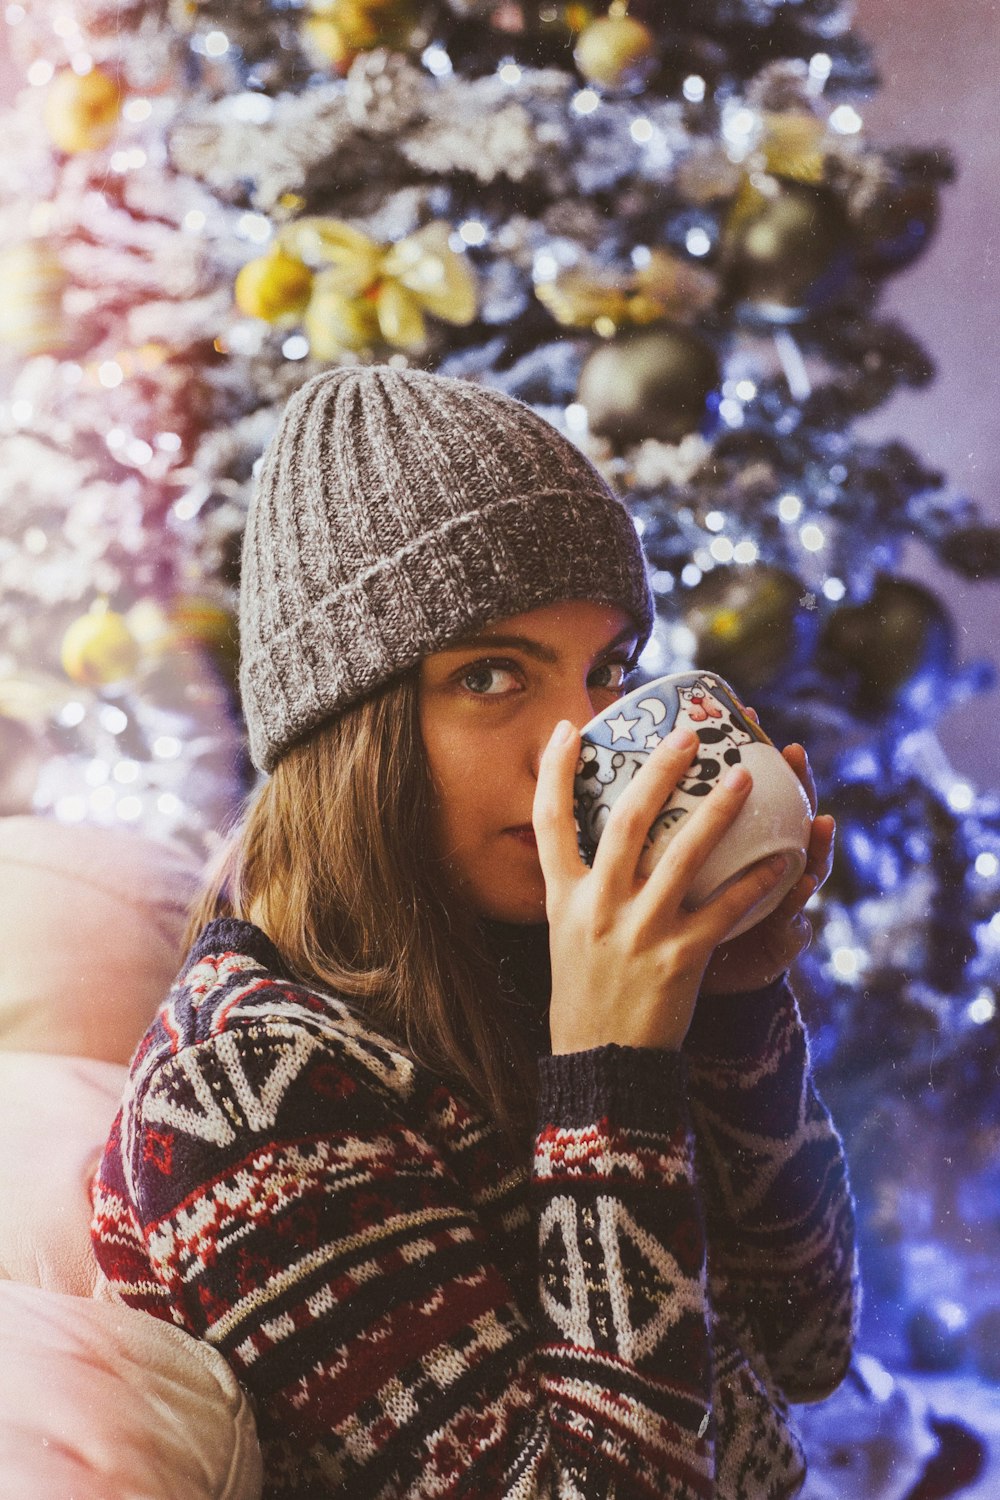 woman drinking from cup near Christmas tree